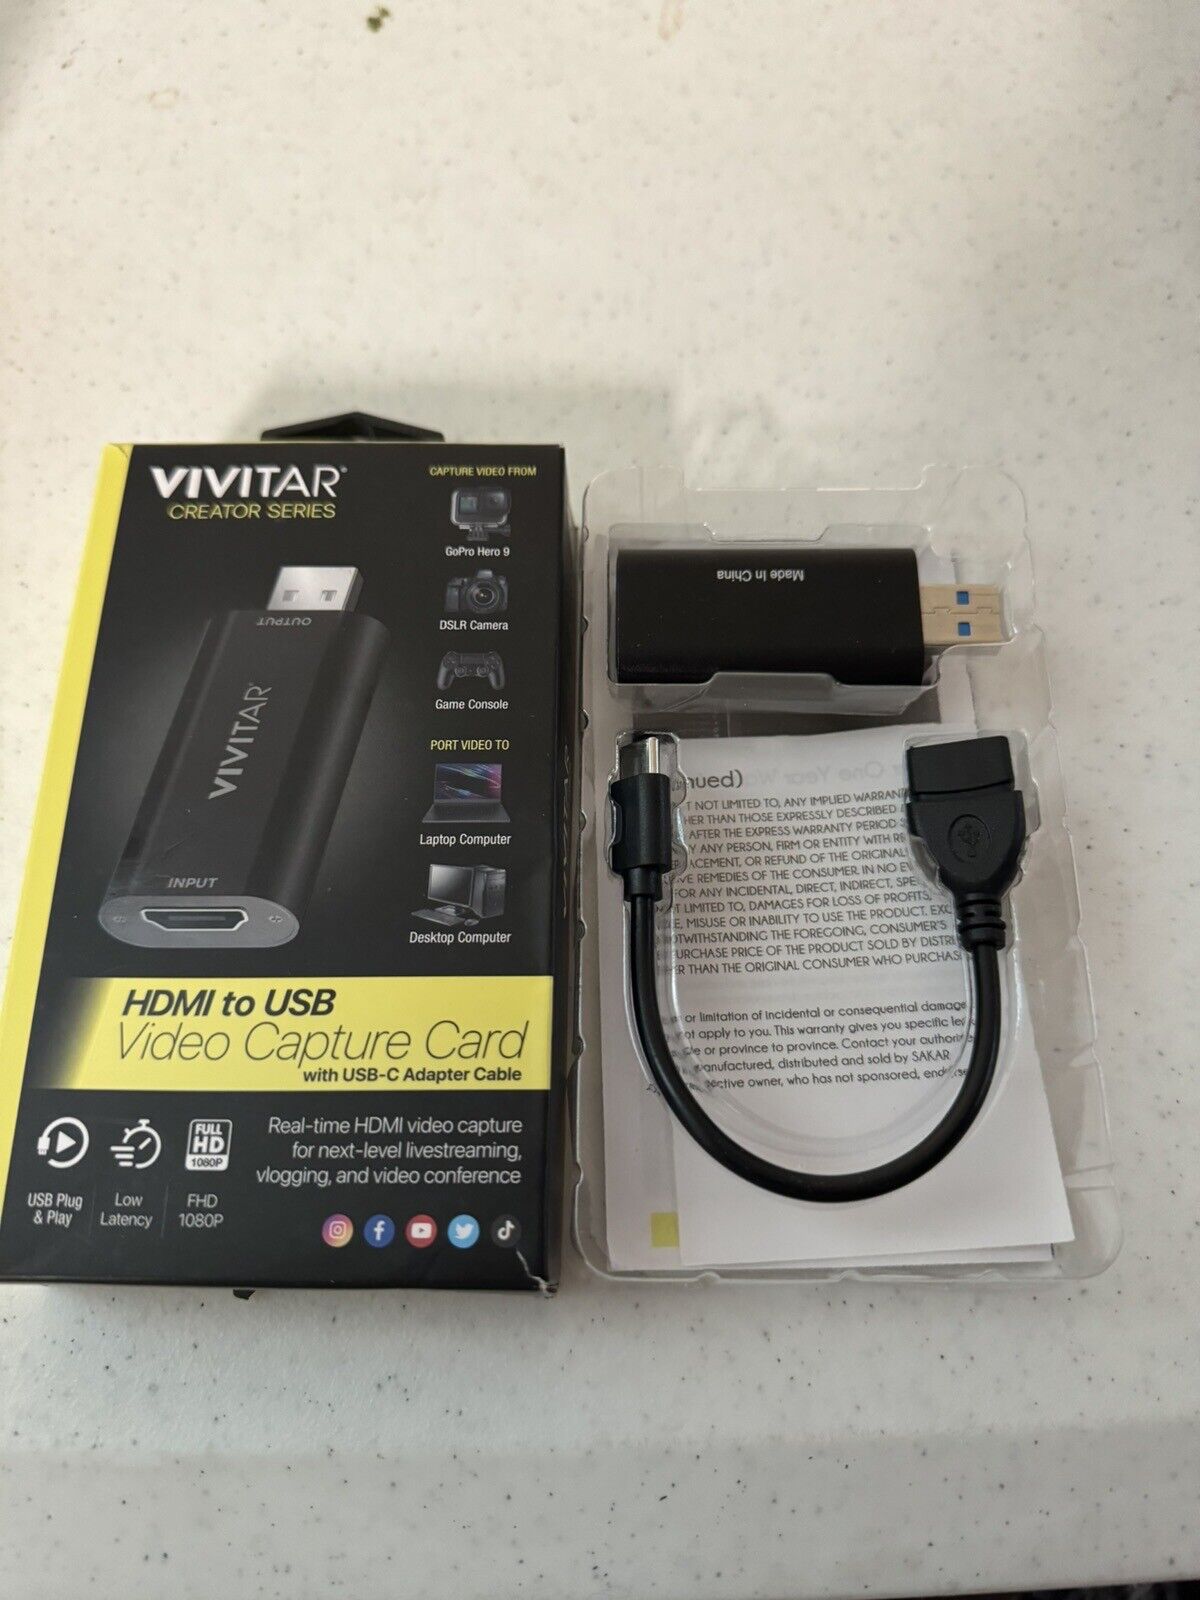 Vivitar Creator Series HDMI to USB Video Capture Card with Real-time HDMI Video